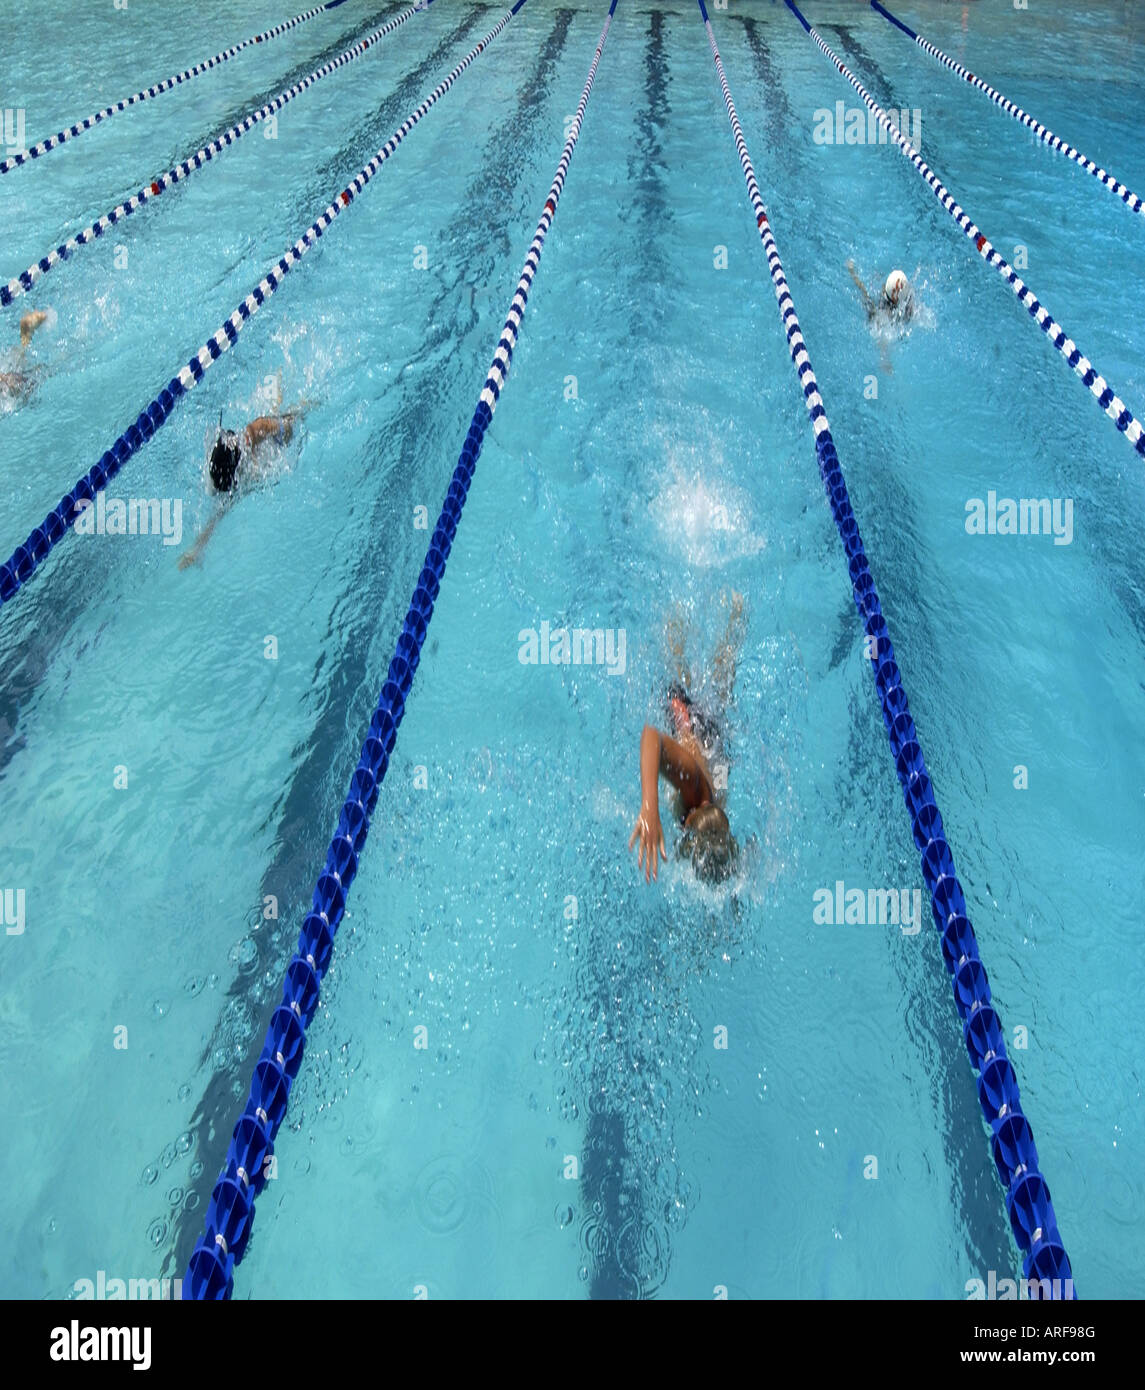 swimming race or match indoor showing showing three swimmers Stock Photo